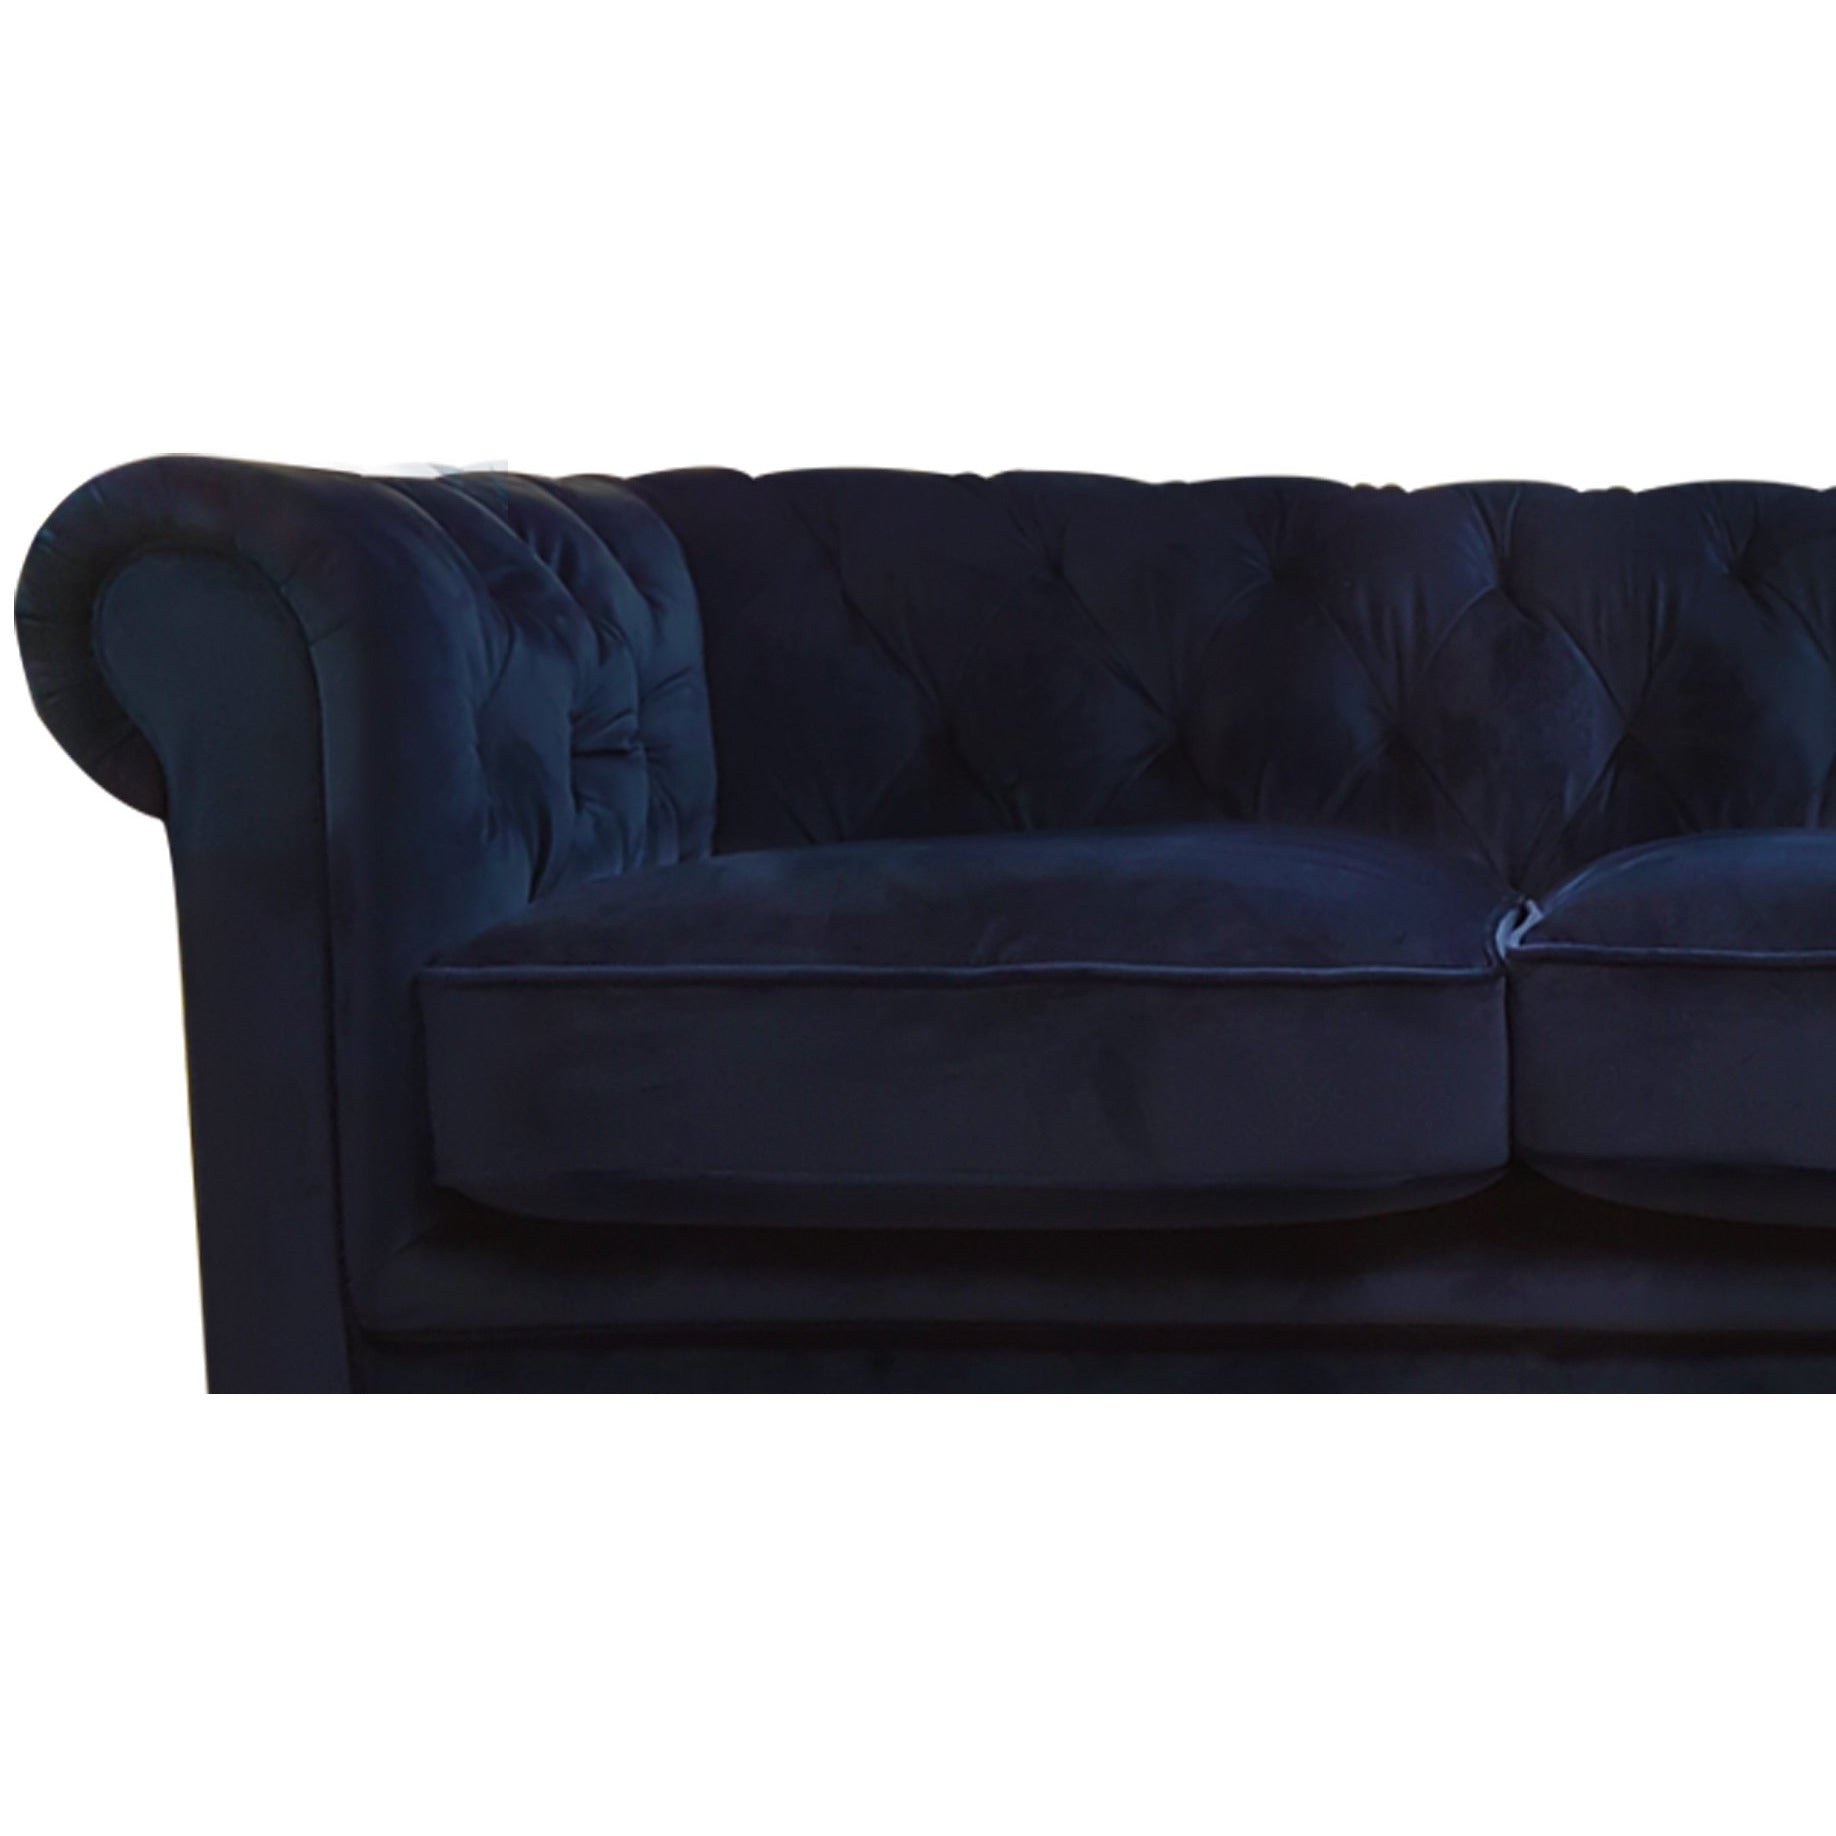 Chesterfield 2 Seater Velvet Sofa from Upstairs Downstairs Furniture in Lisburn, Monaghan and Enniskillen